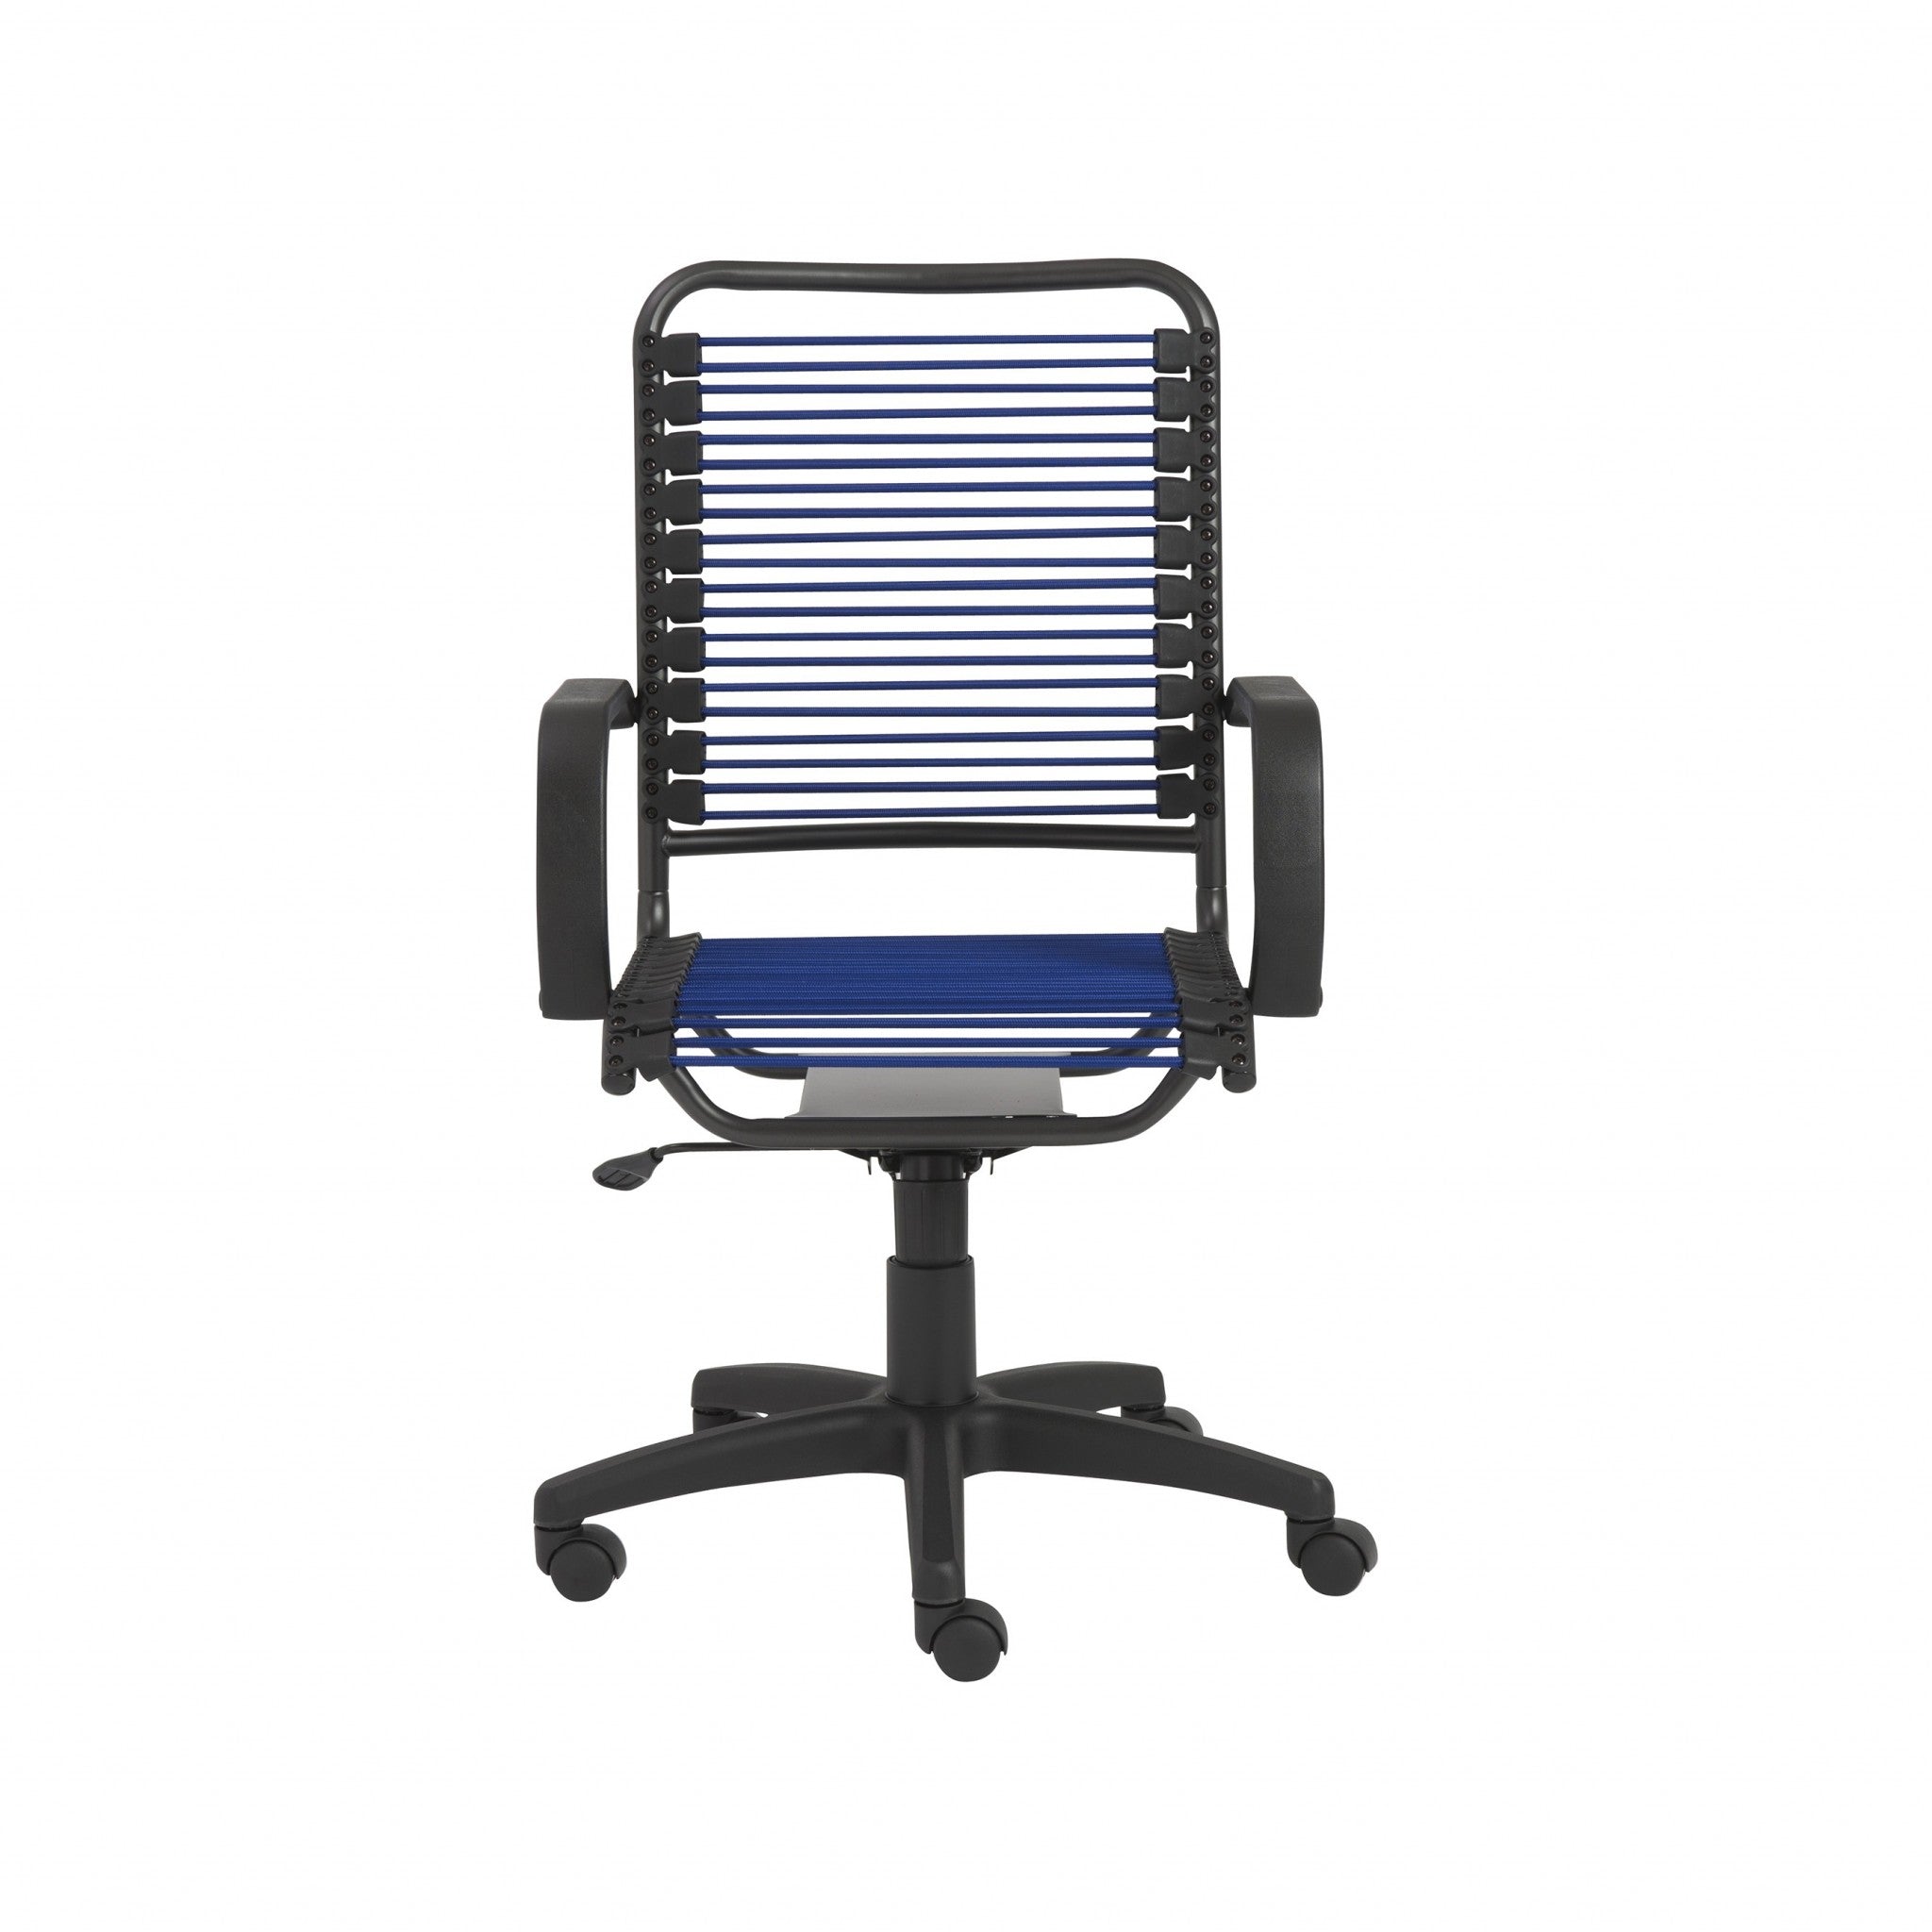 Blue-Swivel-Adjustable-Task-Chair-Bungee-Back-Steel-Frame-Office-Chairs